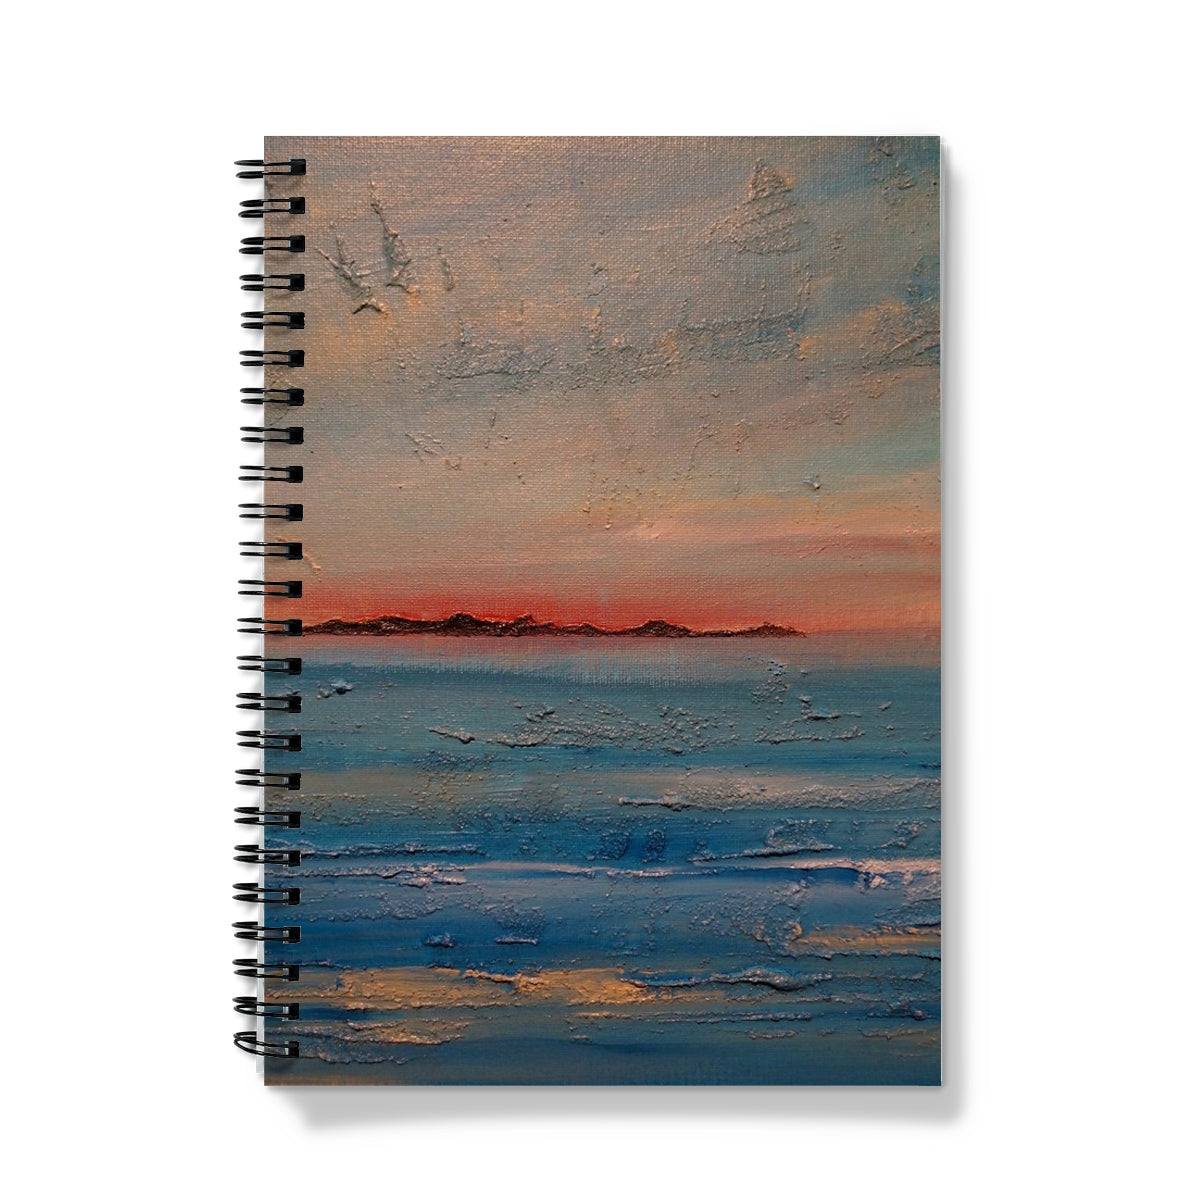 Gigha Sunset Art Gifts Notebook-Journals & Notebooks-Hebridean Islands Art Gallery-A5-Lined-Paintings, Prints, Homeware, Art Gifts From Scotland By Scottish Artist Kevin Hunter